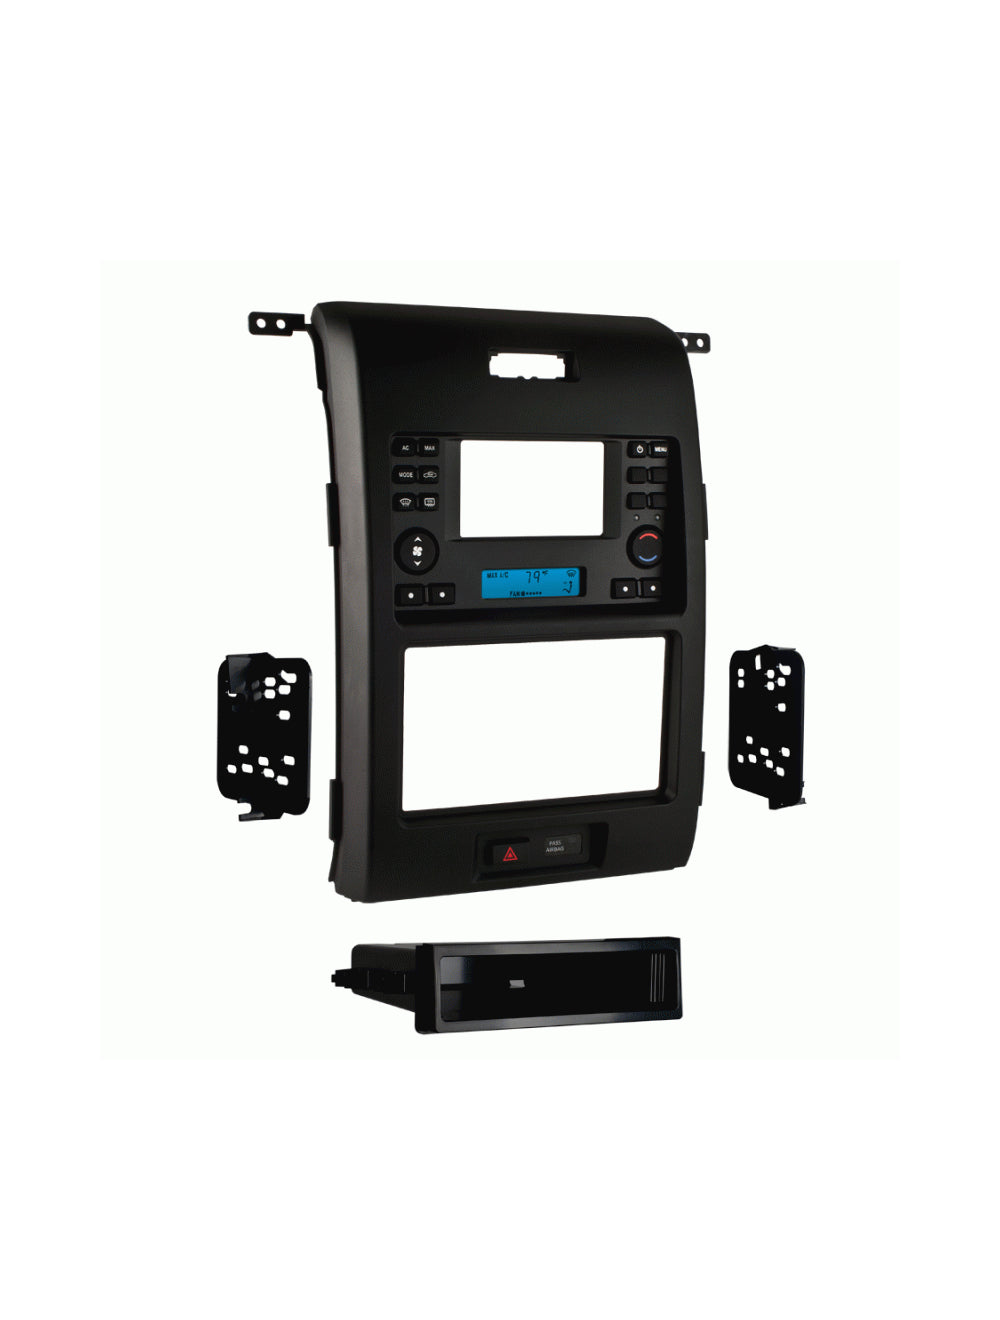 Metra 99-5830B Dash Kit for 2013-Up Ford F-150 with Factory 4.2-Inch LCD Screen Black